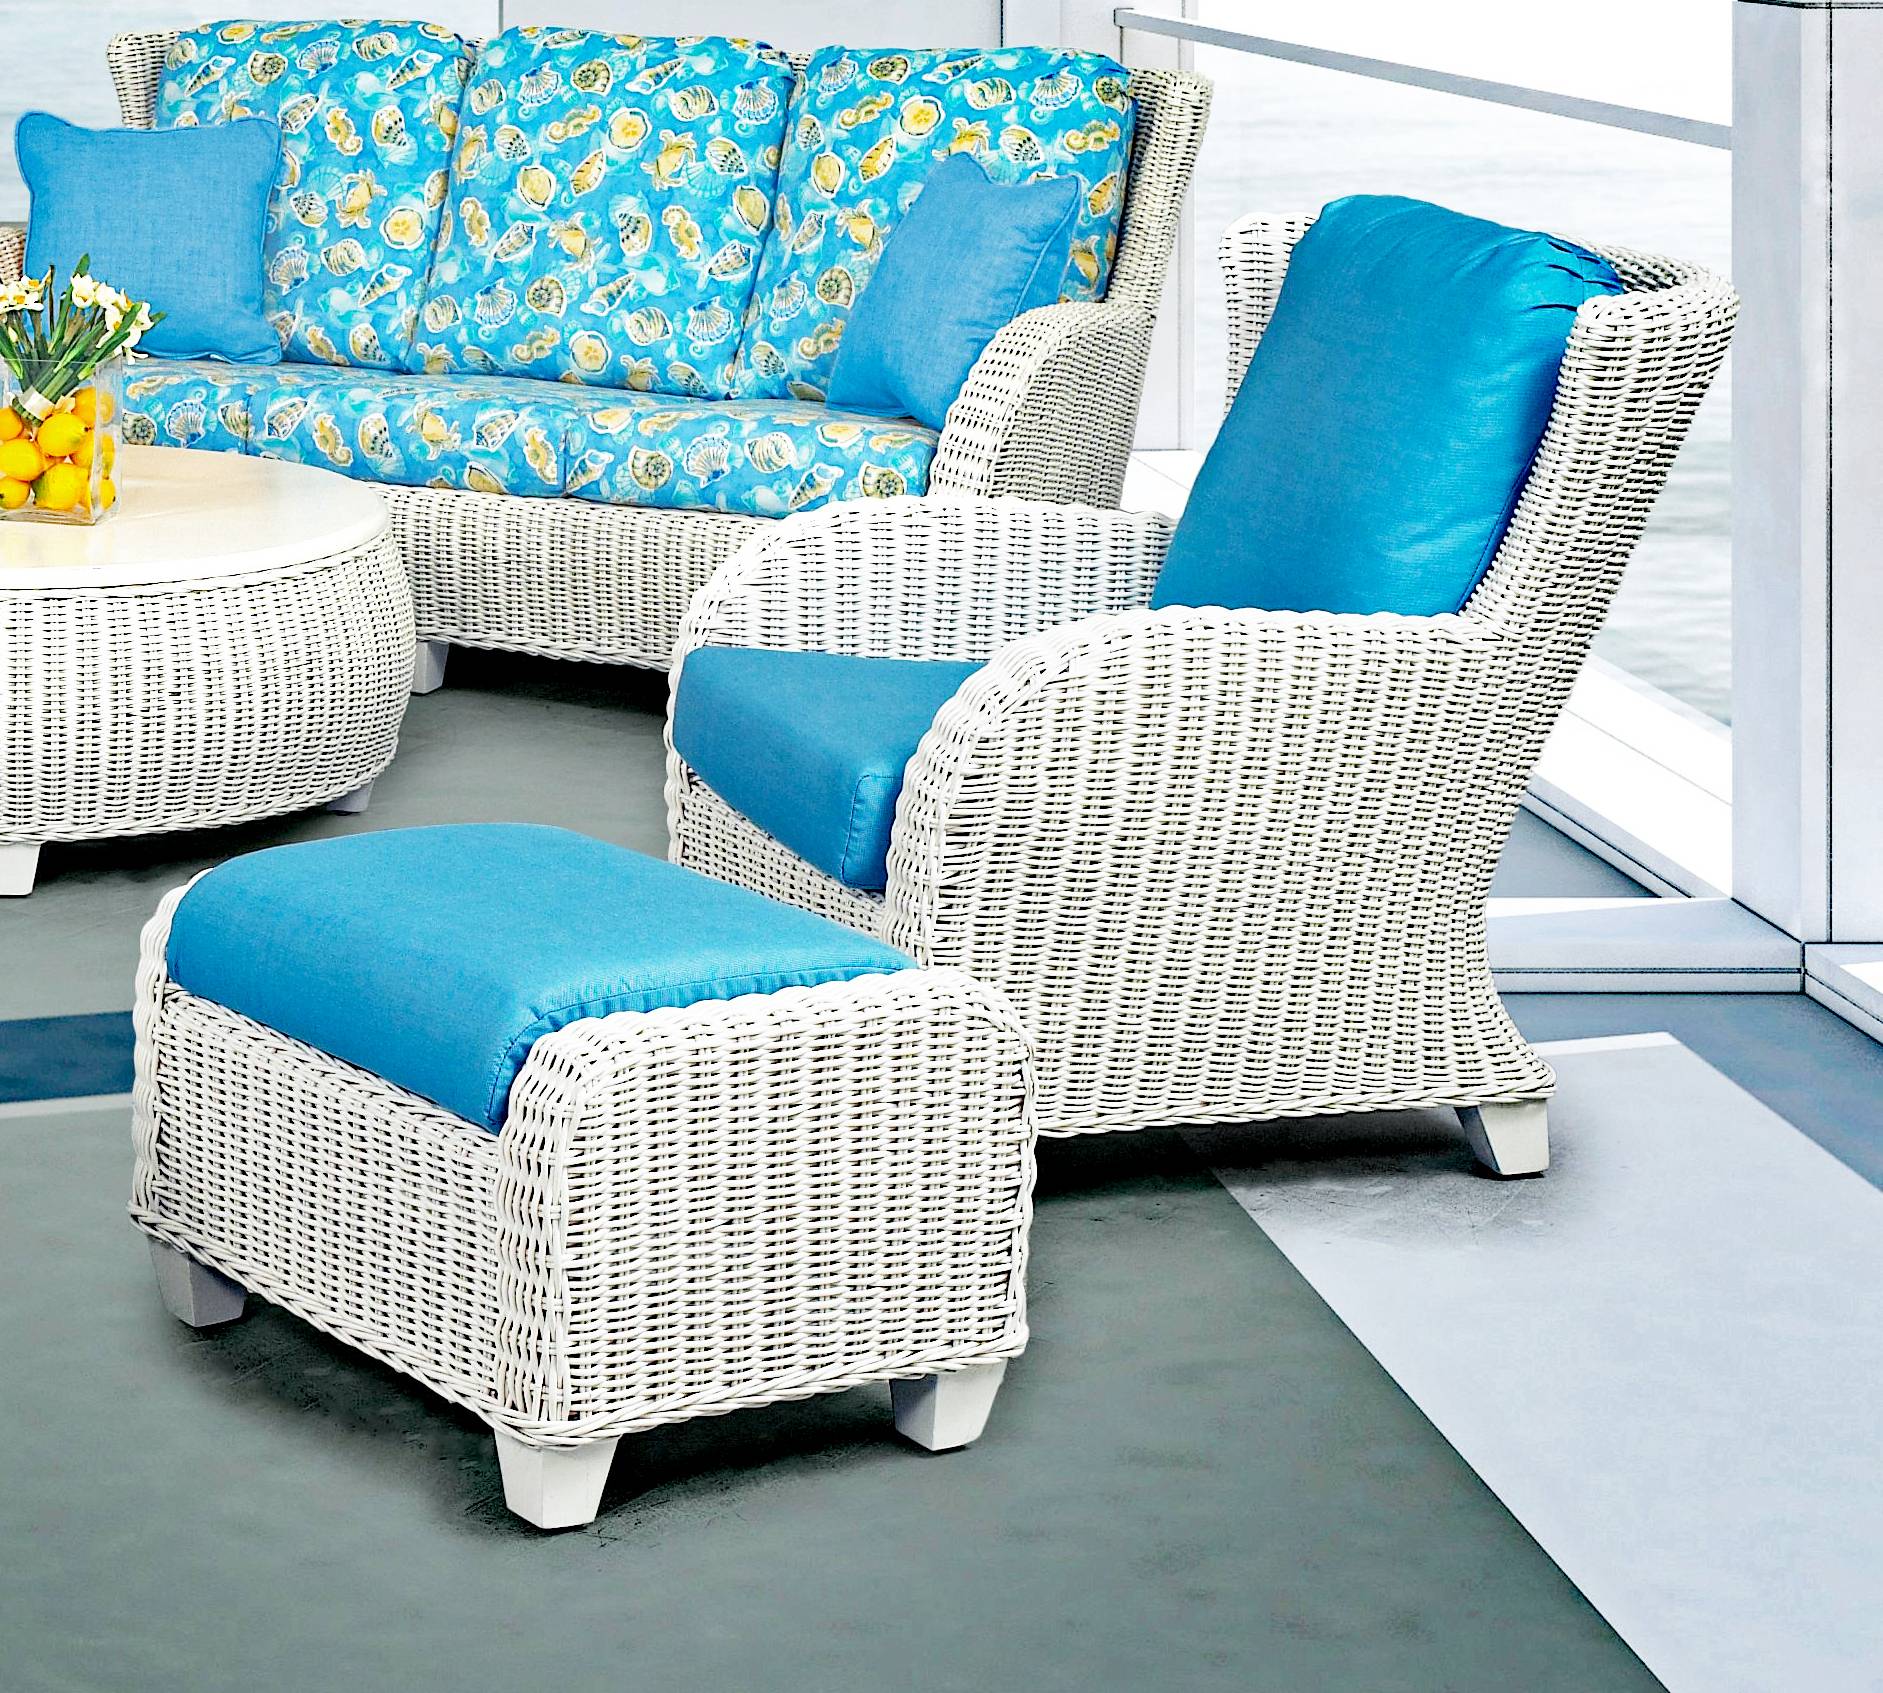 Clarissa lounge chair and ottoman set in white